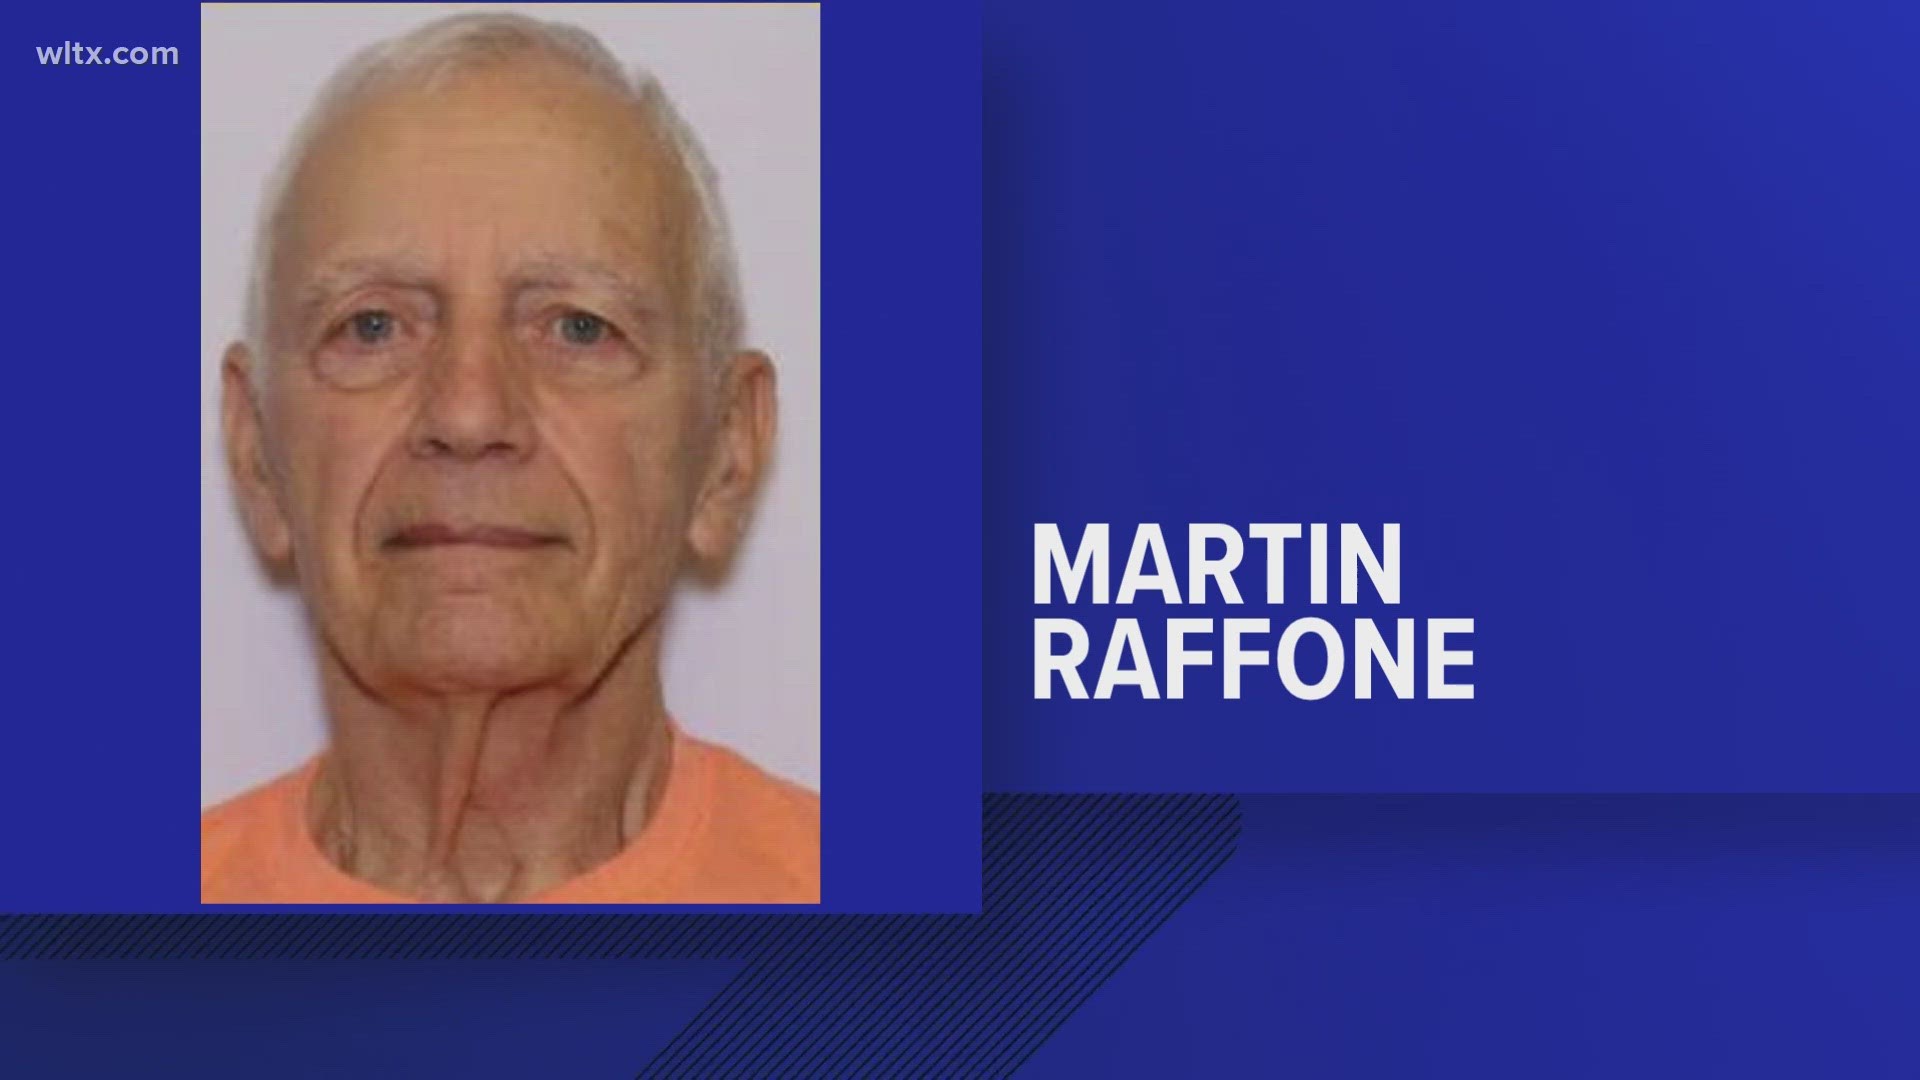 A man with dementia missing from the South Carolina Lowcountry for weeks has been found dead in Lee County.